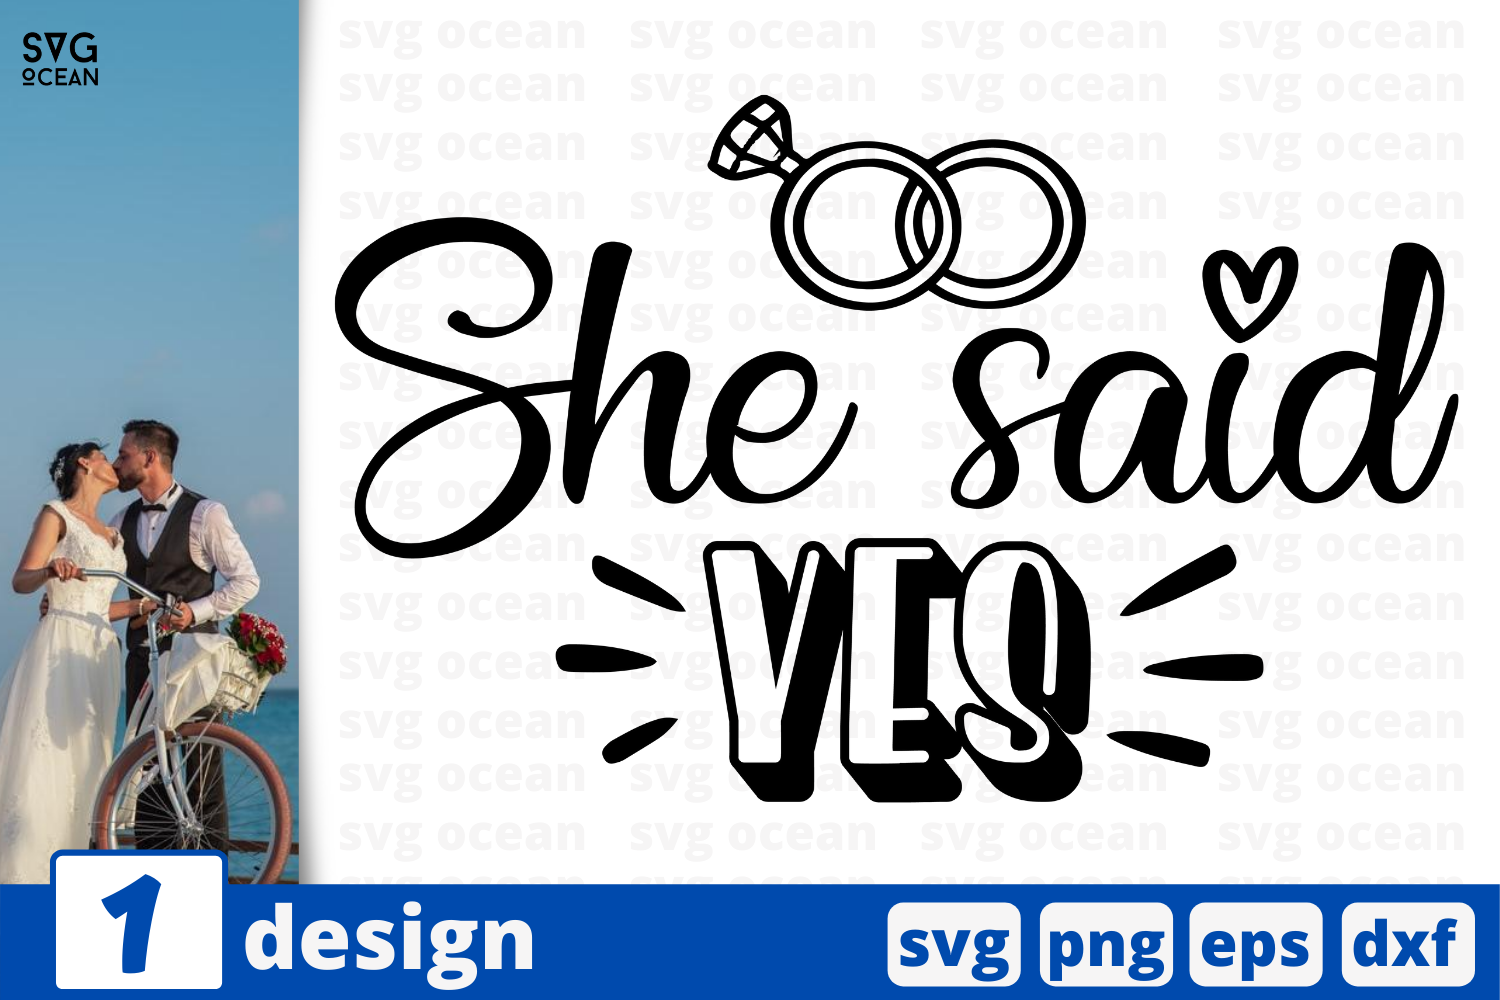 Download 1 She Said Yes Wedding Quotes Cricut Svg By Svgocean Thehungryjpeg Com